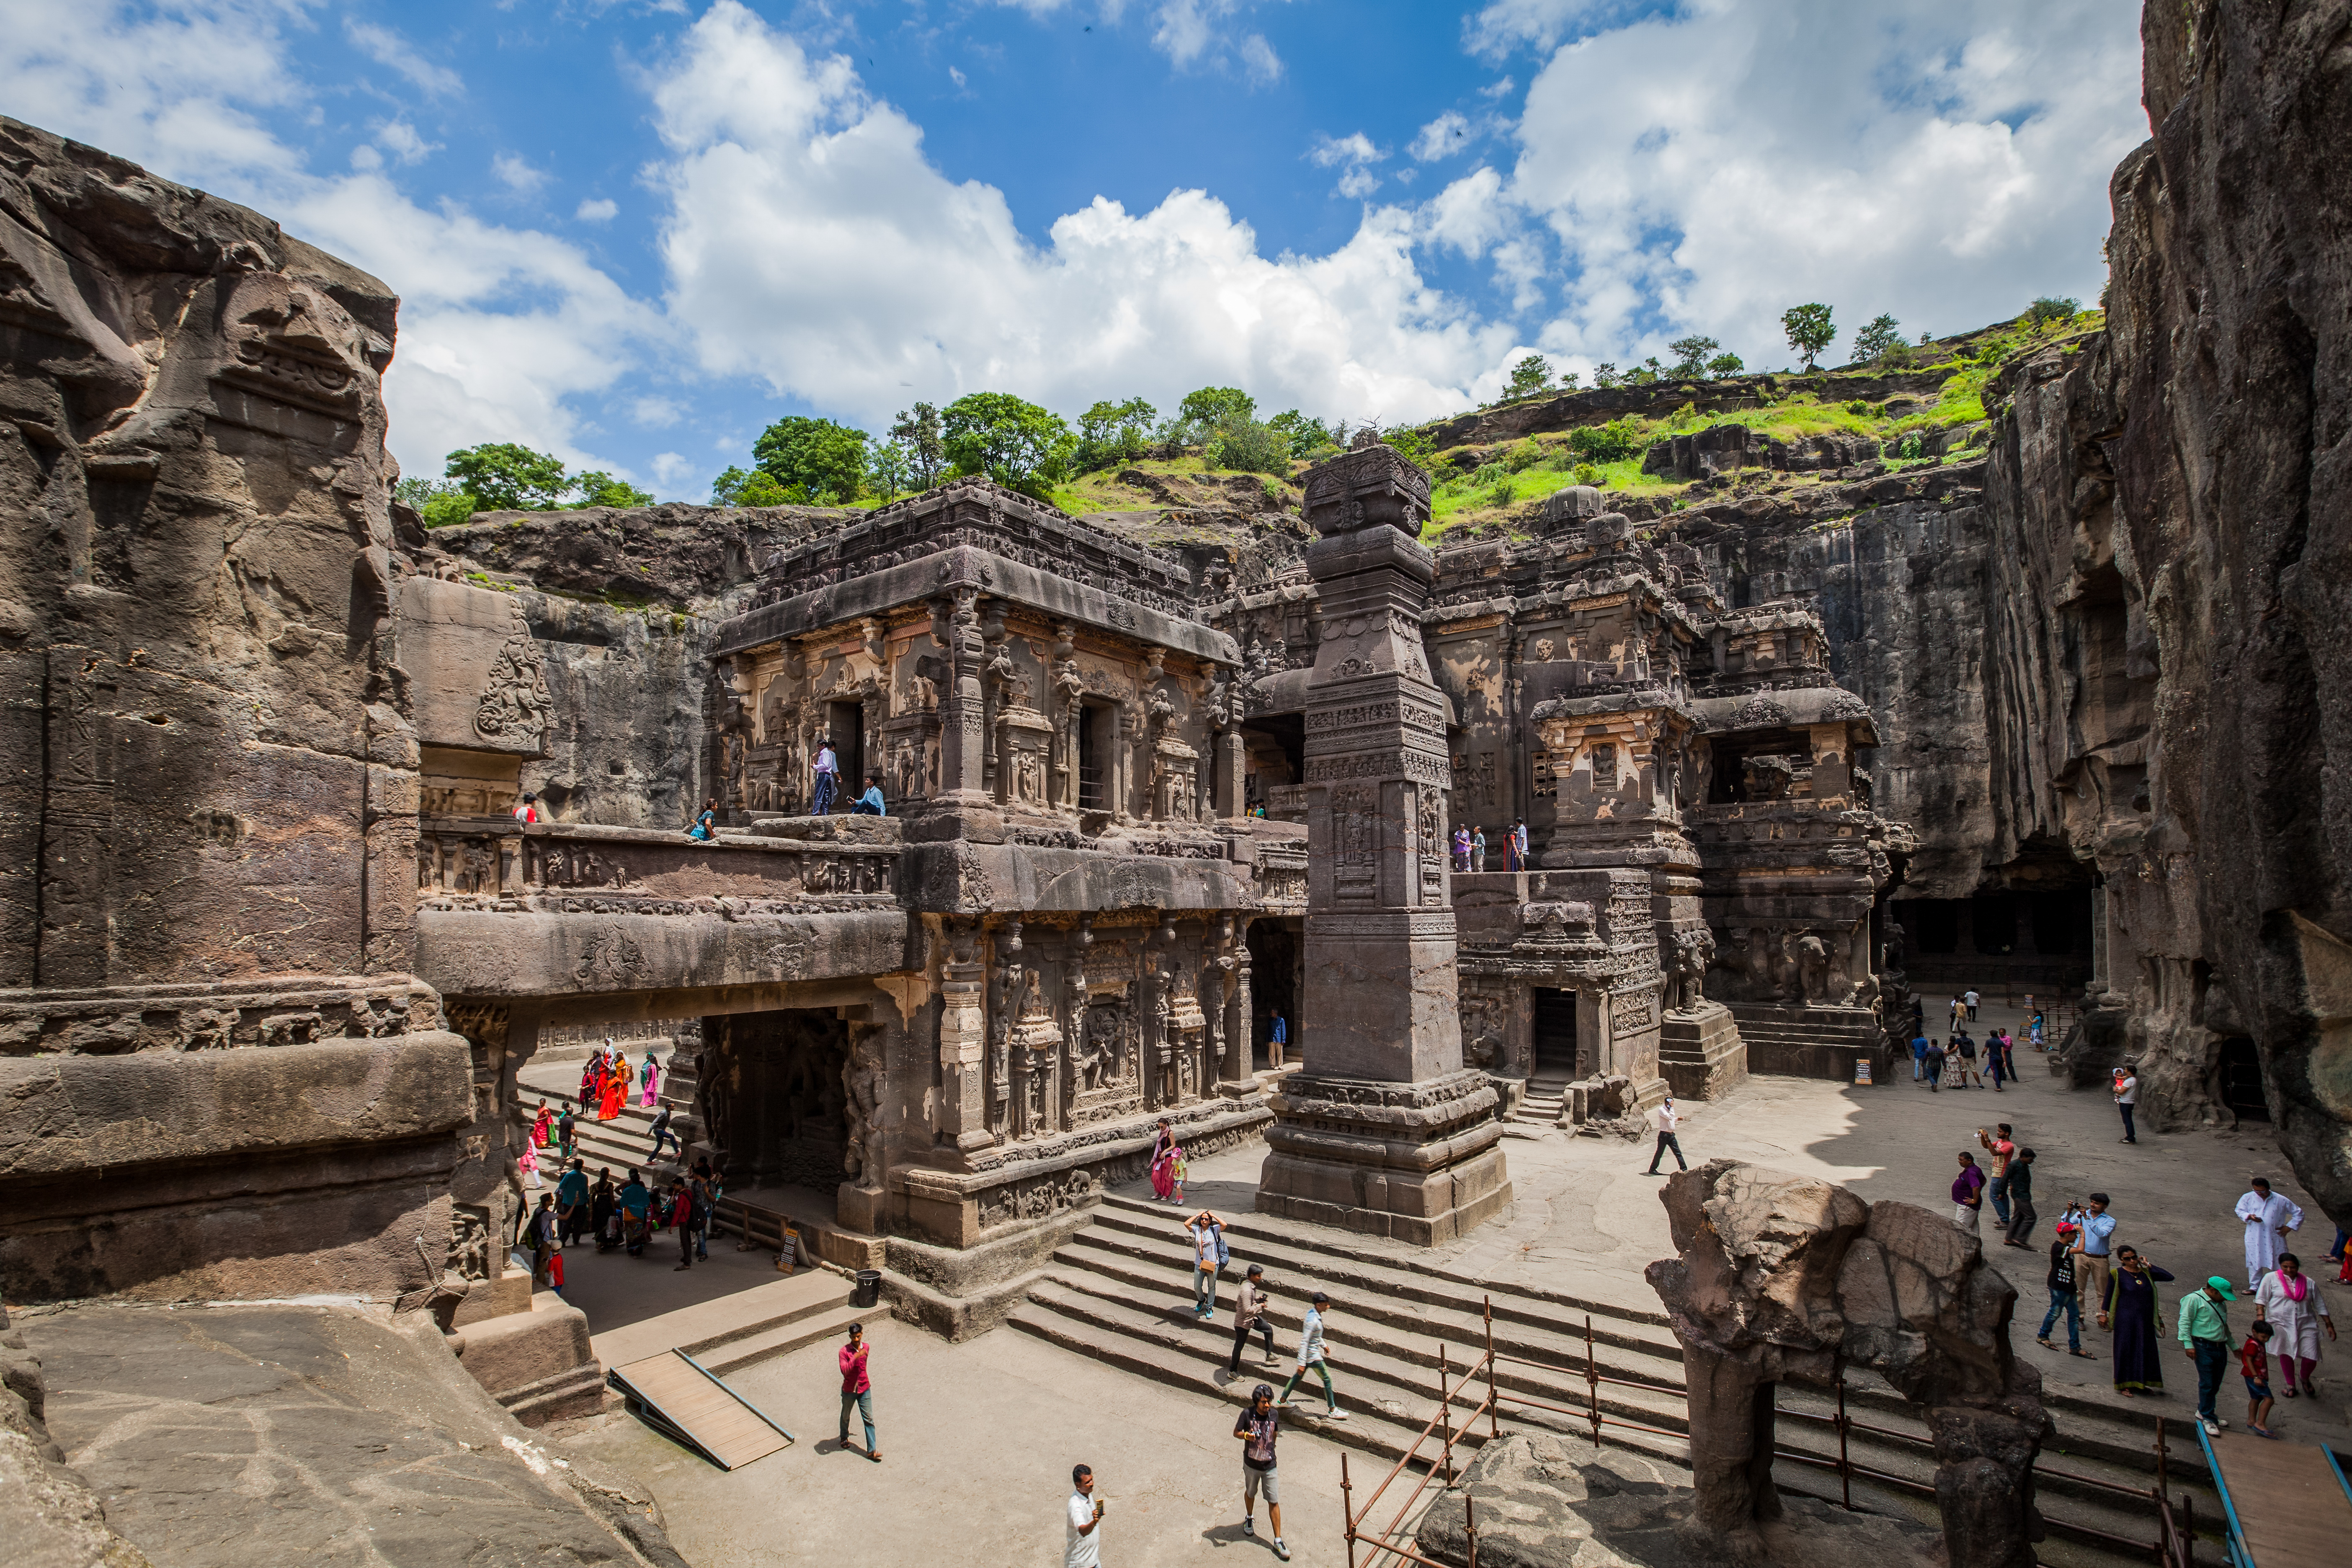 The Kailasa temple is located in Cave 16. It is one of the most spectacular temples in the Ellora caves, Maharashtra.